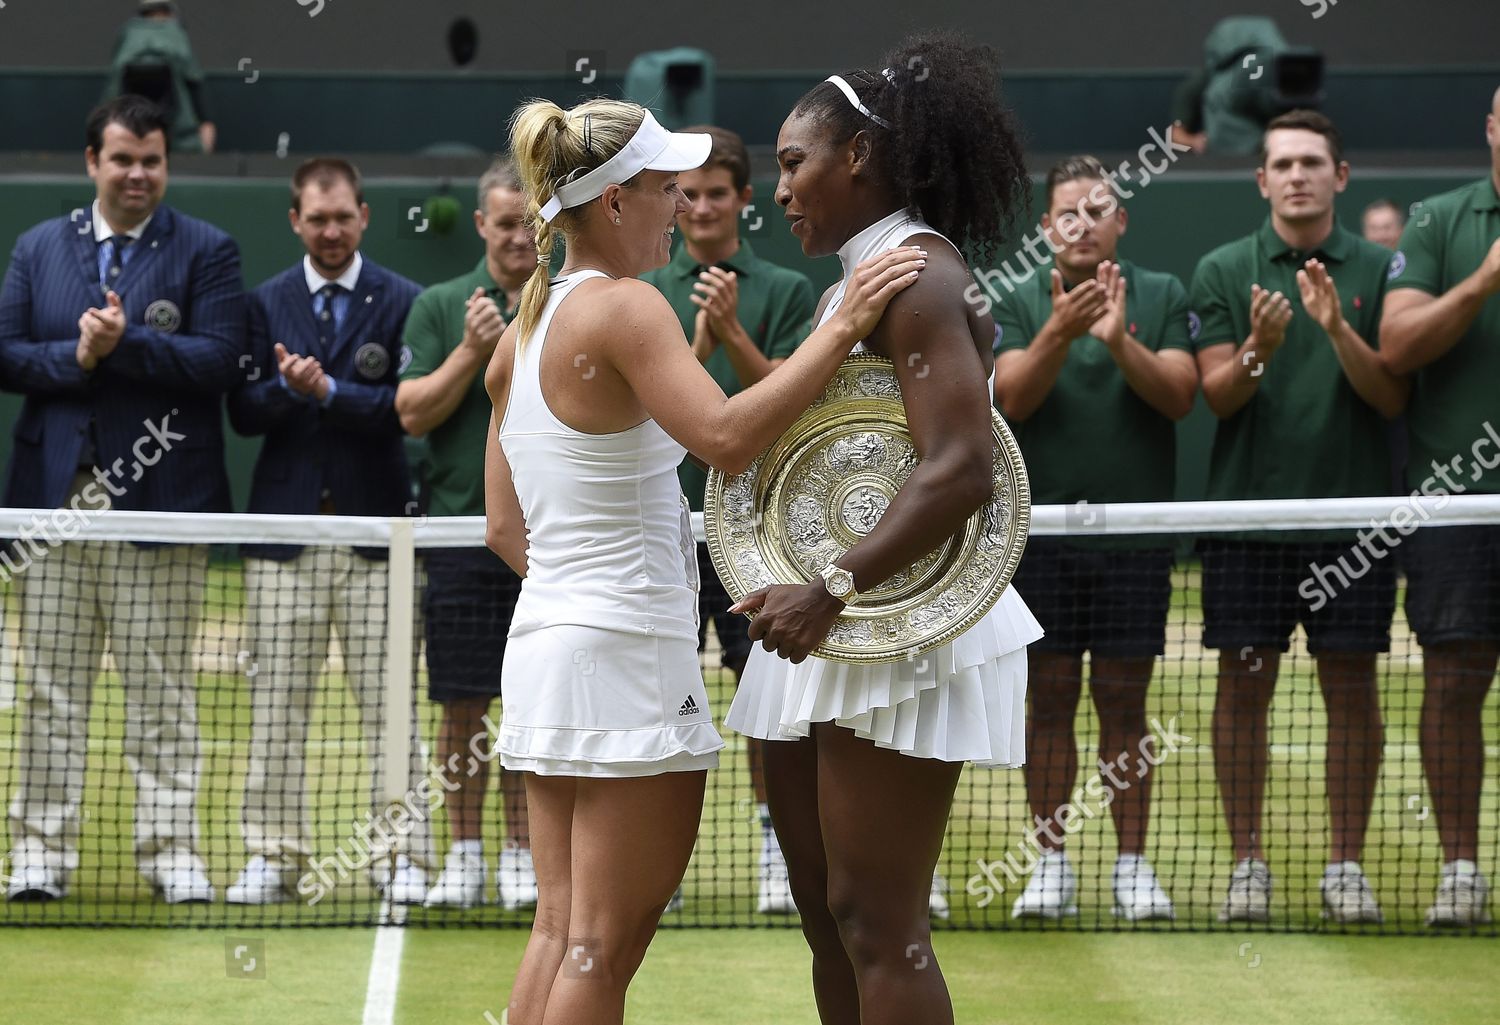 Serena Williams Us Angelique Kerber Germany Their Editorial Stock Photo Stock Image Shutterstock